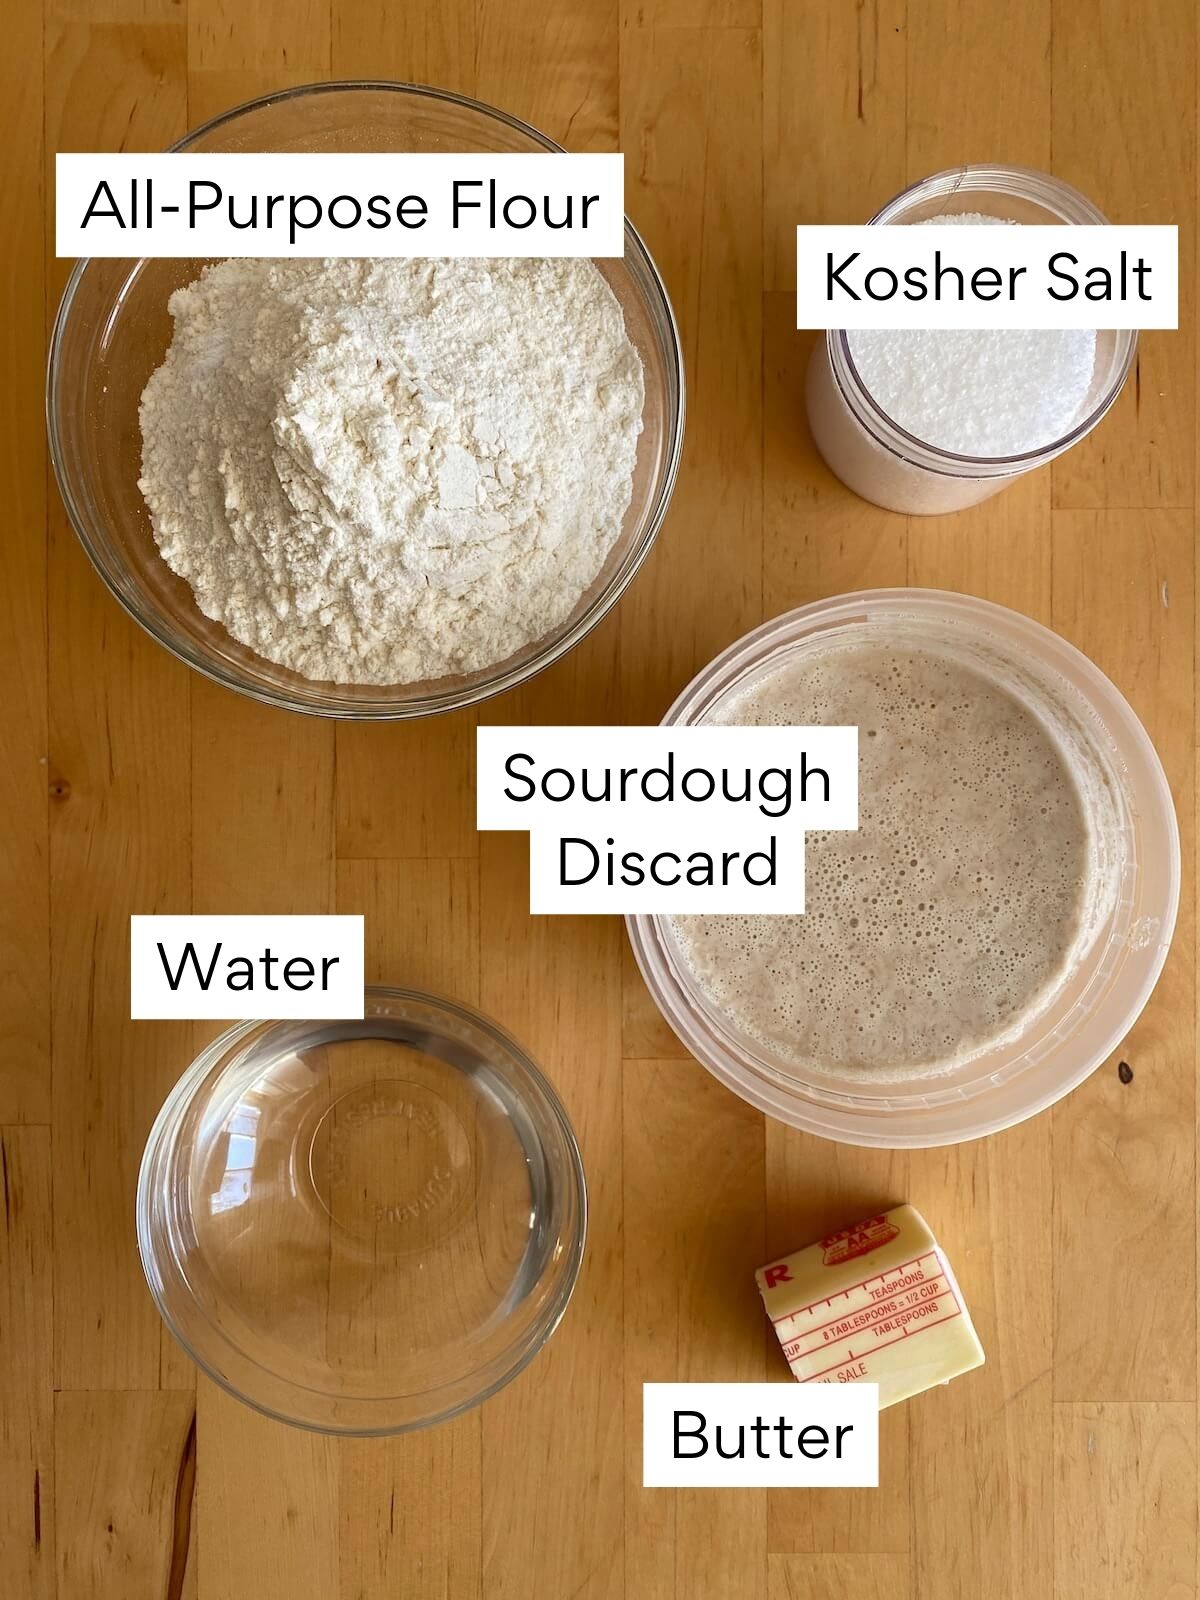 The ingredients to make sourdough discard tortillas. Each ingredient is labeled with text. They include all-purpose flour, kosher salt, sourdough discard, water, and butter.